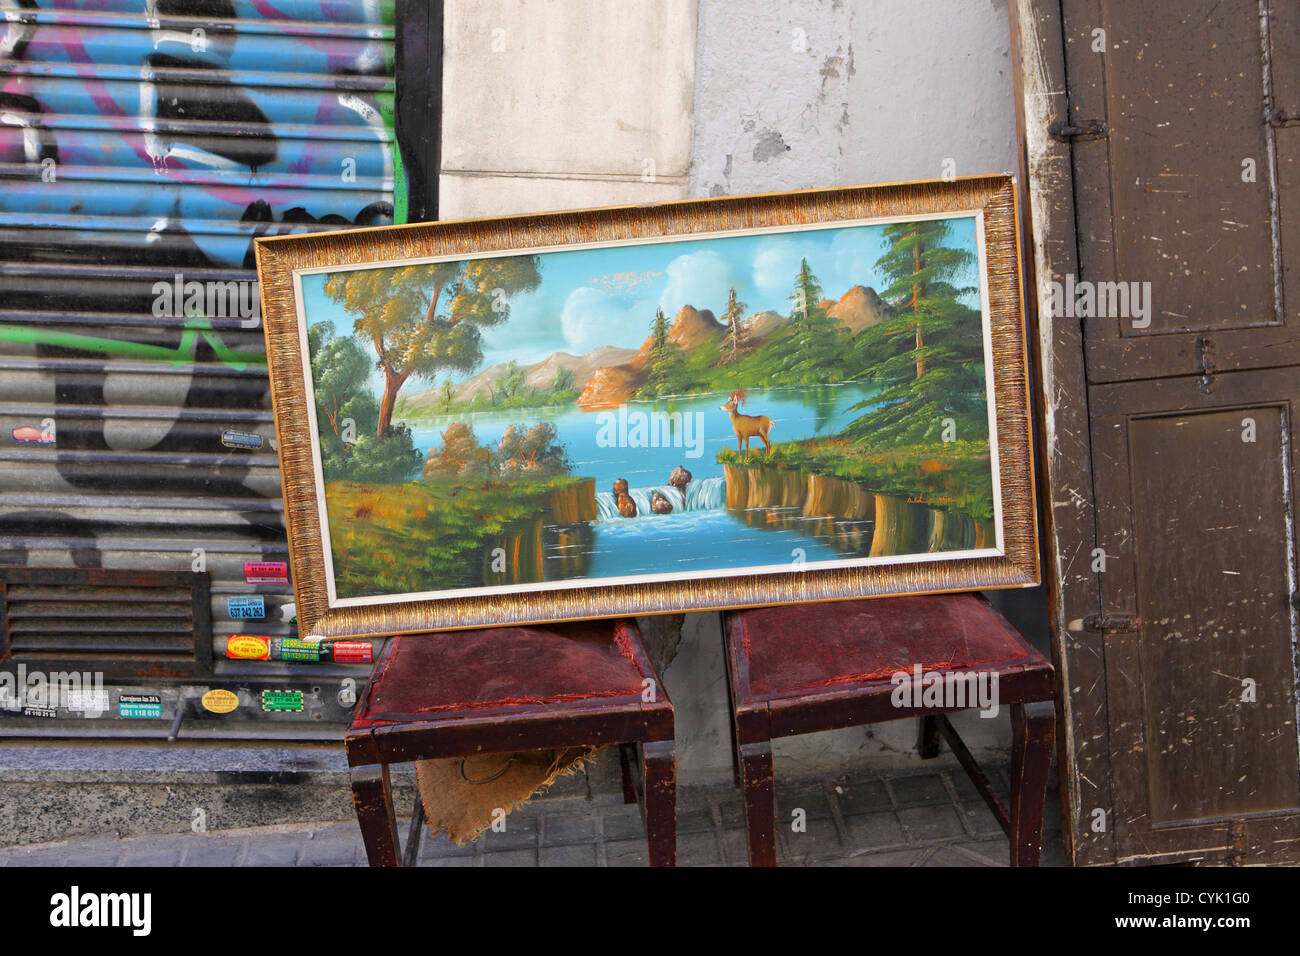 Chintzy kitsch genre landscape oil painting for sale street pavement stall, El Rastro, Madrid, Spain Stock Photo